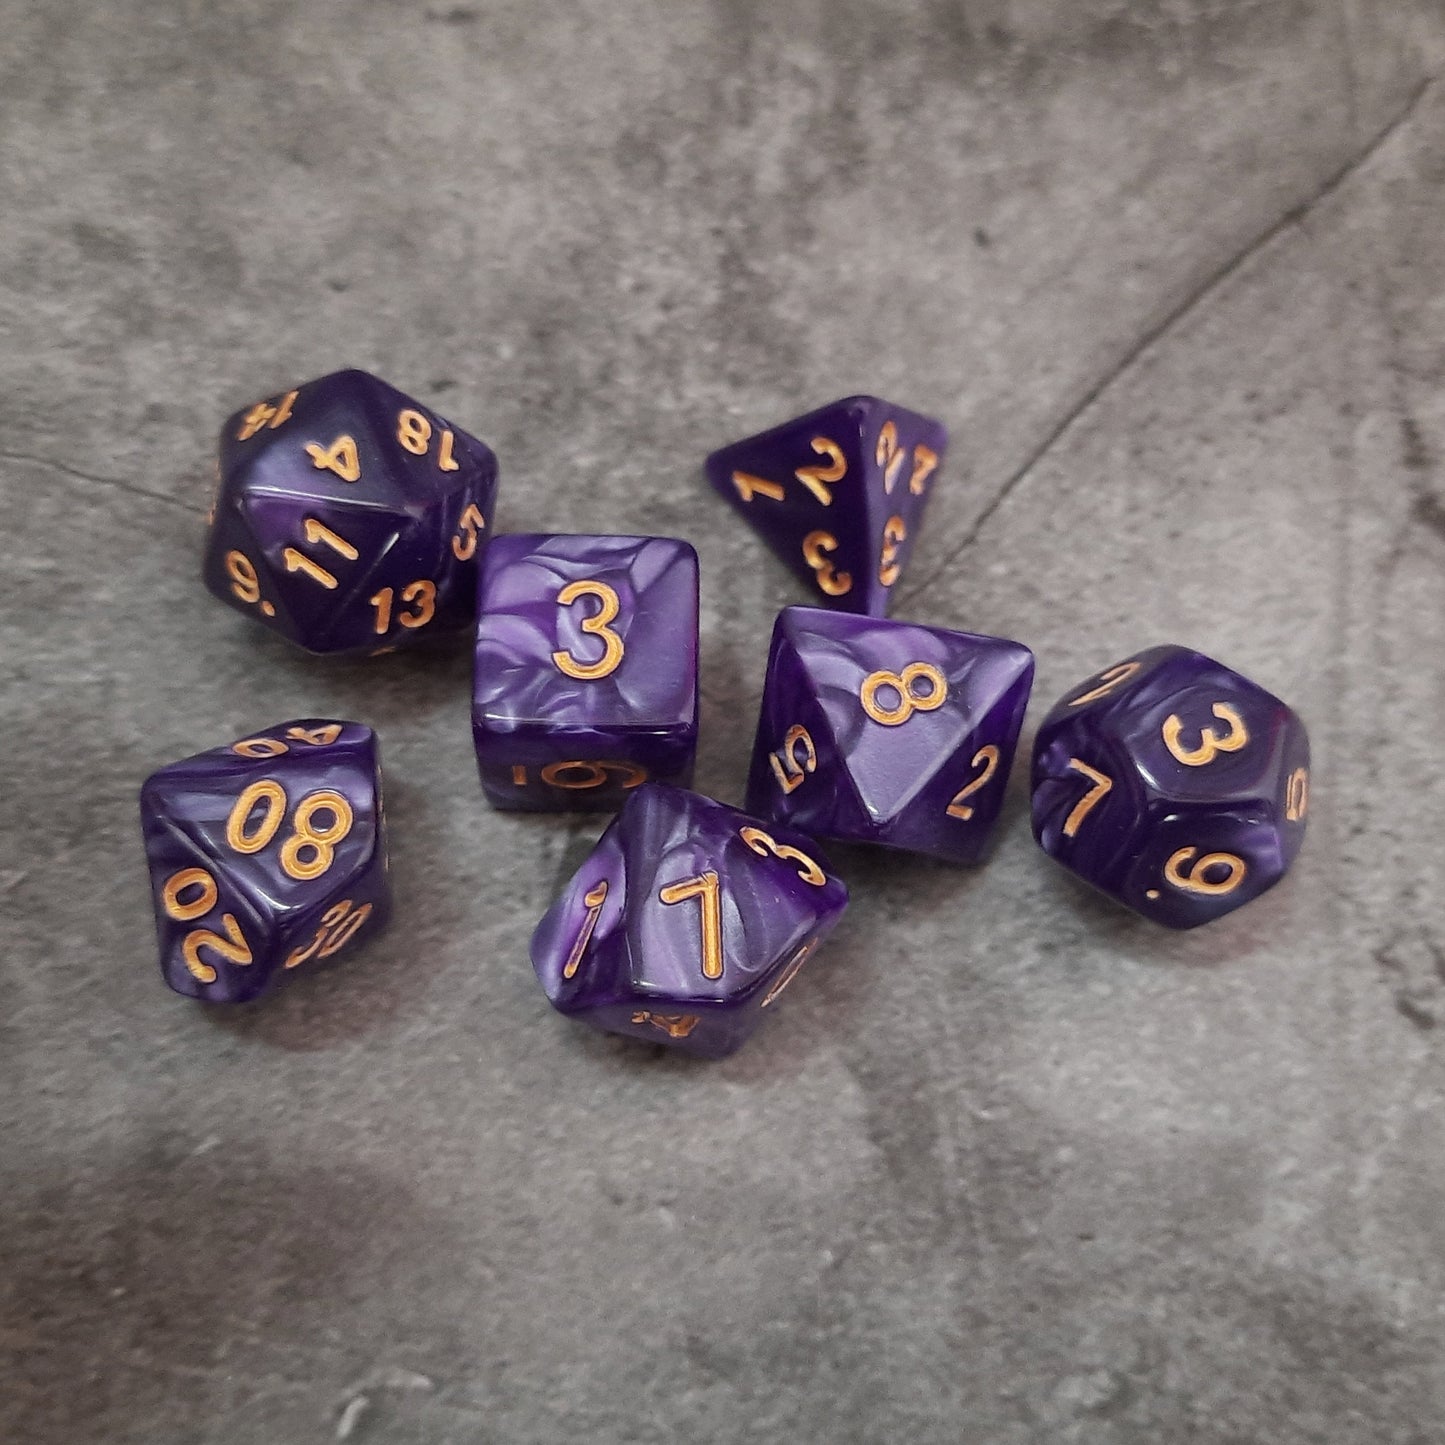 Dice set, many beautiful colors available!